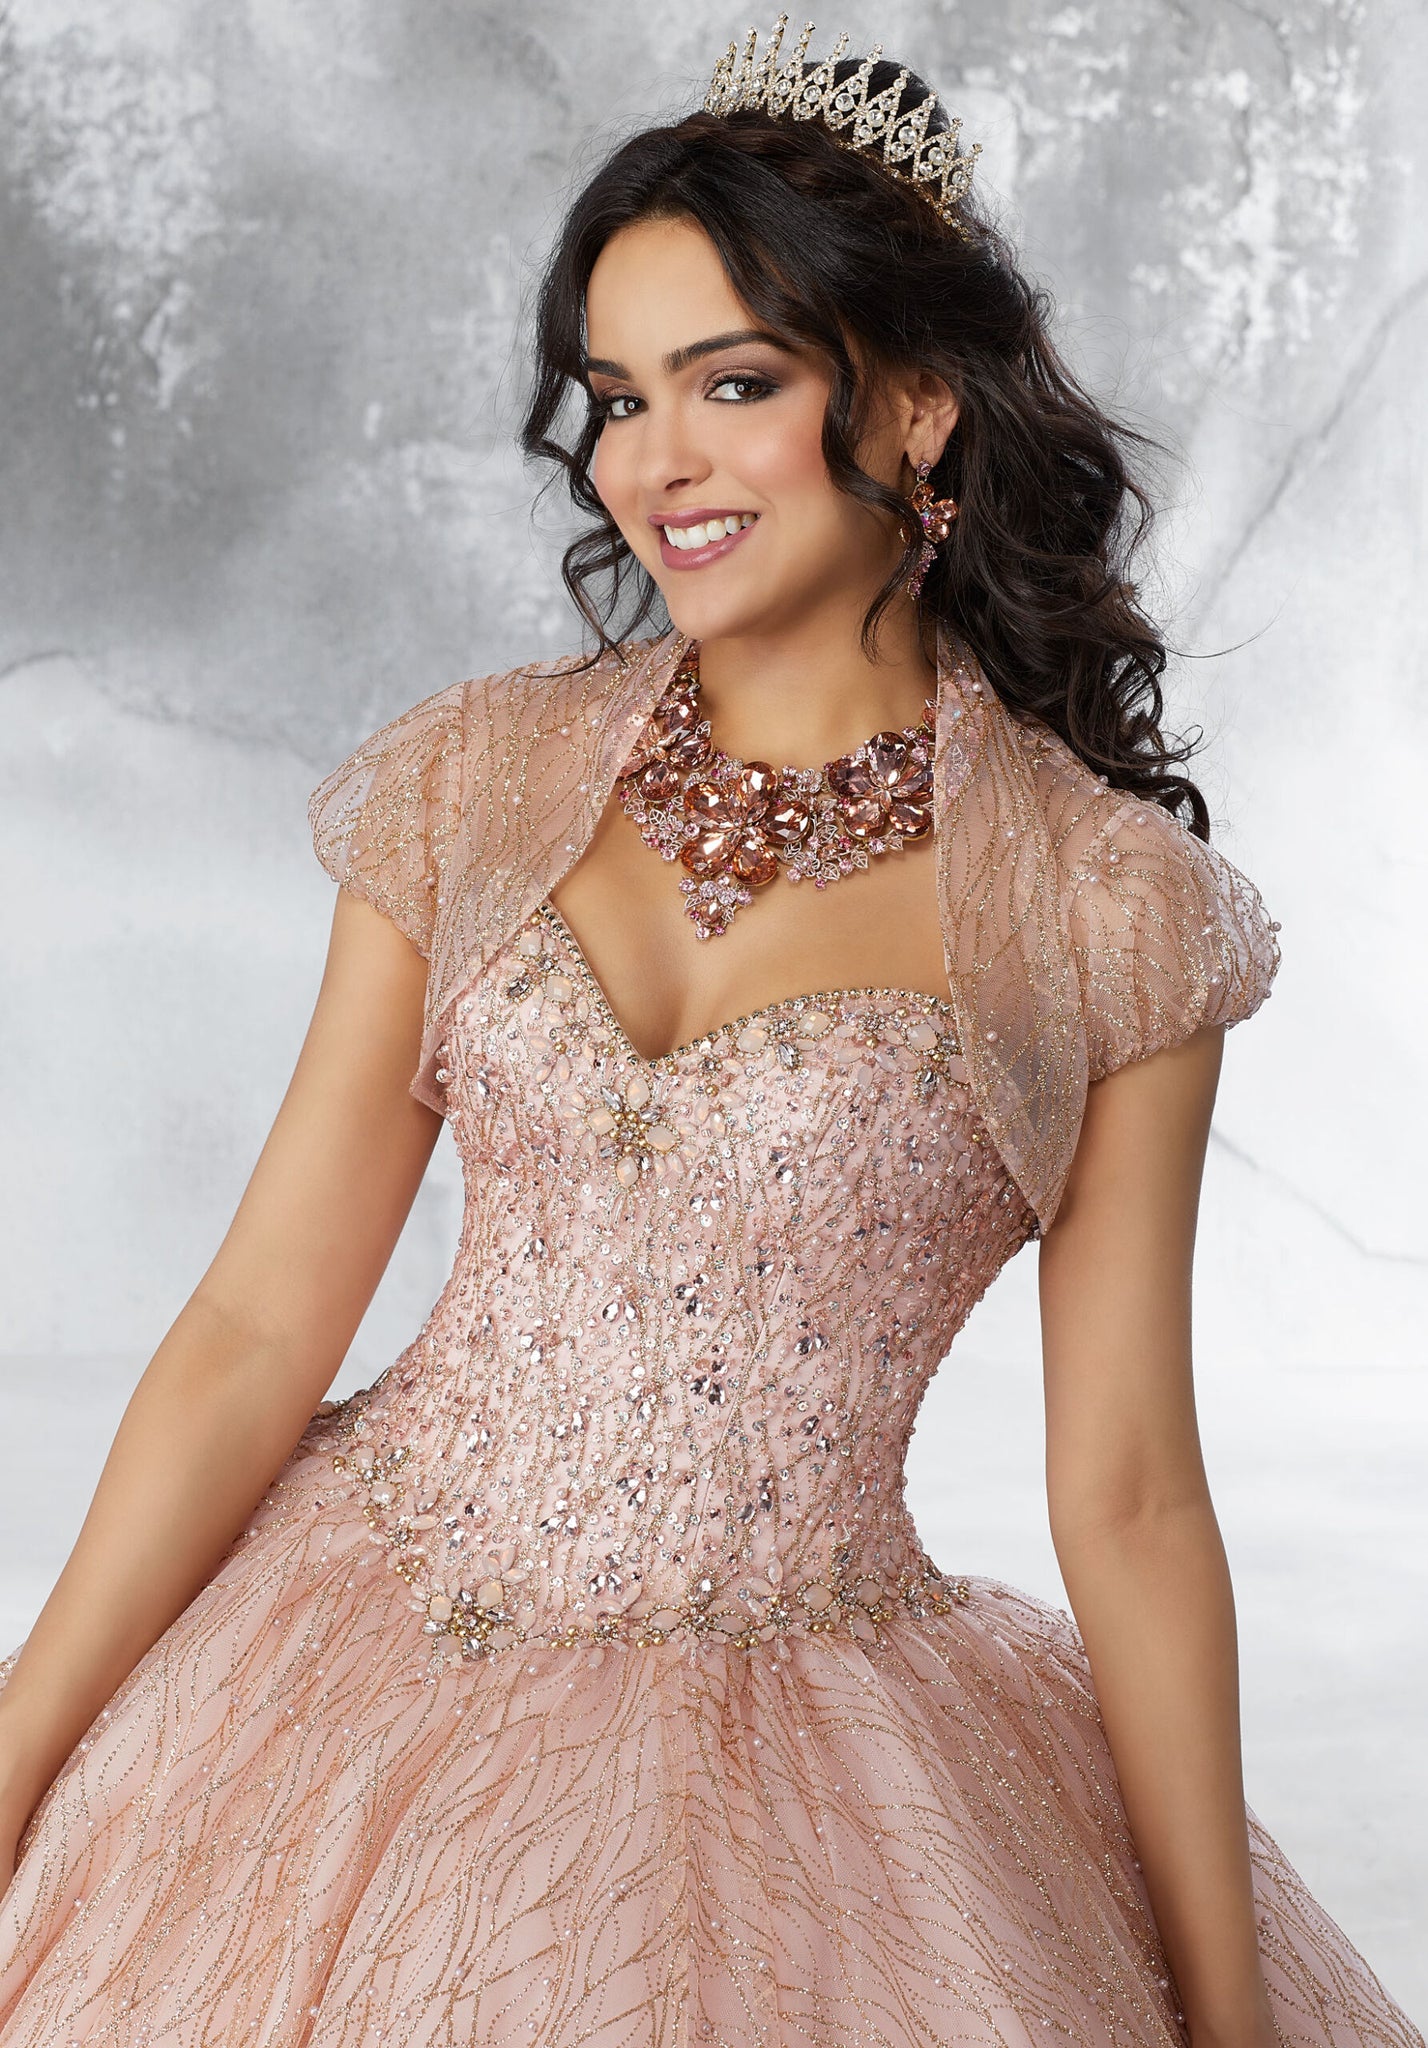 Beaded Bodice on a Patterned Glitter Mesh Ballgown with Pearl Detail